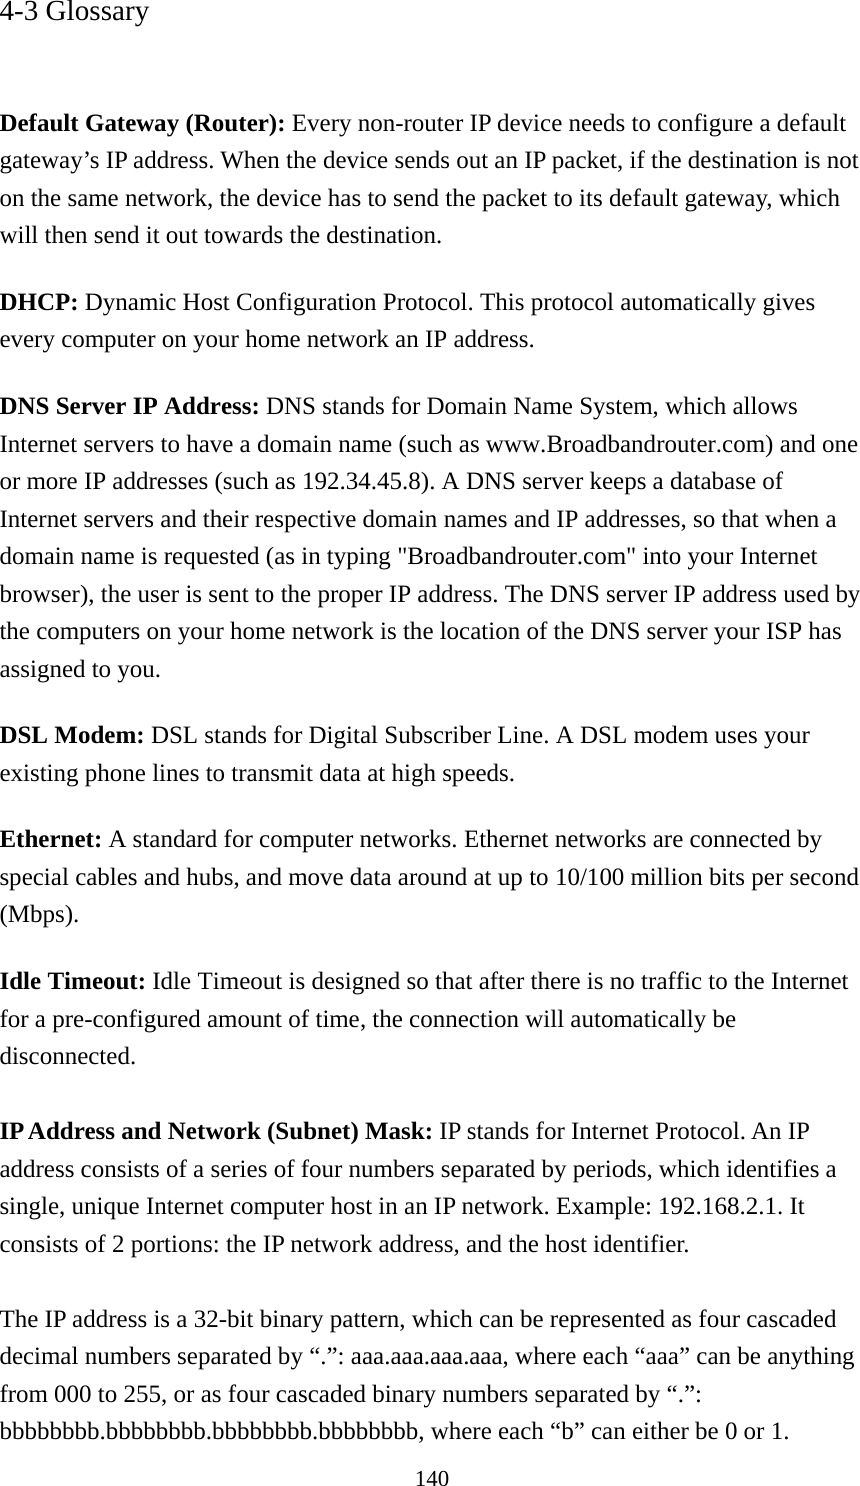 140 4-3 Glossary   Default Gateway (Router): Every non-router IP device needs to configure a default gateway’s IP address. When the device sends out an IP packet, if the destination is not on the same network, the device has to send the packet to its default gateway, which will then send it out towards the destination. DHCP: Dynamic Host Configuration Protocol. This protocol automatically gives every computer on your home network an IP address. DNS Server IP Address: DNS stands for Domain Name System, which allows Internet servers to have a domain name (such as www.Broadbandrouter.com) and one or more IP addresses (such as 192.34.45.8). A DNS server keeps a database of Internet servers and their respective domain names and IP addresses, so that when a domain name is requested (as in typing &quot;Broadbandrouter.com&quot; into your Internet browser), the user is sent to the proper IP address. The DNS server IP address used by the computers on your home network is the location of the DNS server your ISP has assigned to you.   DSL Modem: DSL stands for Digital Subscriber Line. A DSL modem uses your existing phone lines to transmit data at high speeds.   Ethernet: A standard for computer networks. Ethernet networks are connected by special cables and hubs, and move data around at up to 10/100 million bits per second (Mbps).  Idle Timeout: Idle Timeout is designed so that after there is no traffic to the Internet for a pre-configured amount of time, the connection will automatically be disconnected.  IP Address and Network (Subnet) Mask: IP stands for Internet Protocol. An IP address consists of a series of four numbers separated by periods, which identifies a single, unique Internet computer host in an IP network. Example: 192.168.2.1. It consists of 2 portions: the IP network address, and the host identifier.  The IP address is a 32-bit binary pattern, which can be represented as four cascaded decimal numbers separated by “.”: aaa.aaa.aaa.aaa, where each “aaa” can be anything from 000 to 255, or as four cascaded binary numbers separated by “.”: bbbbbbbb.bbbbbbbb.bbbbbbbb.bbbbbbbb, where each “b” can either be 0 or 1. 